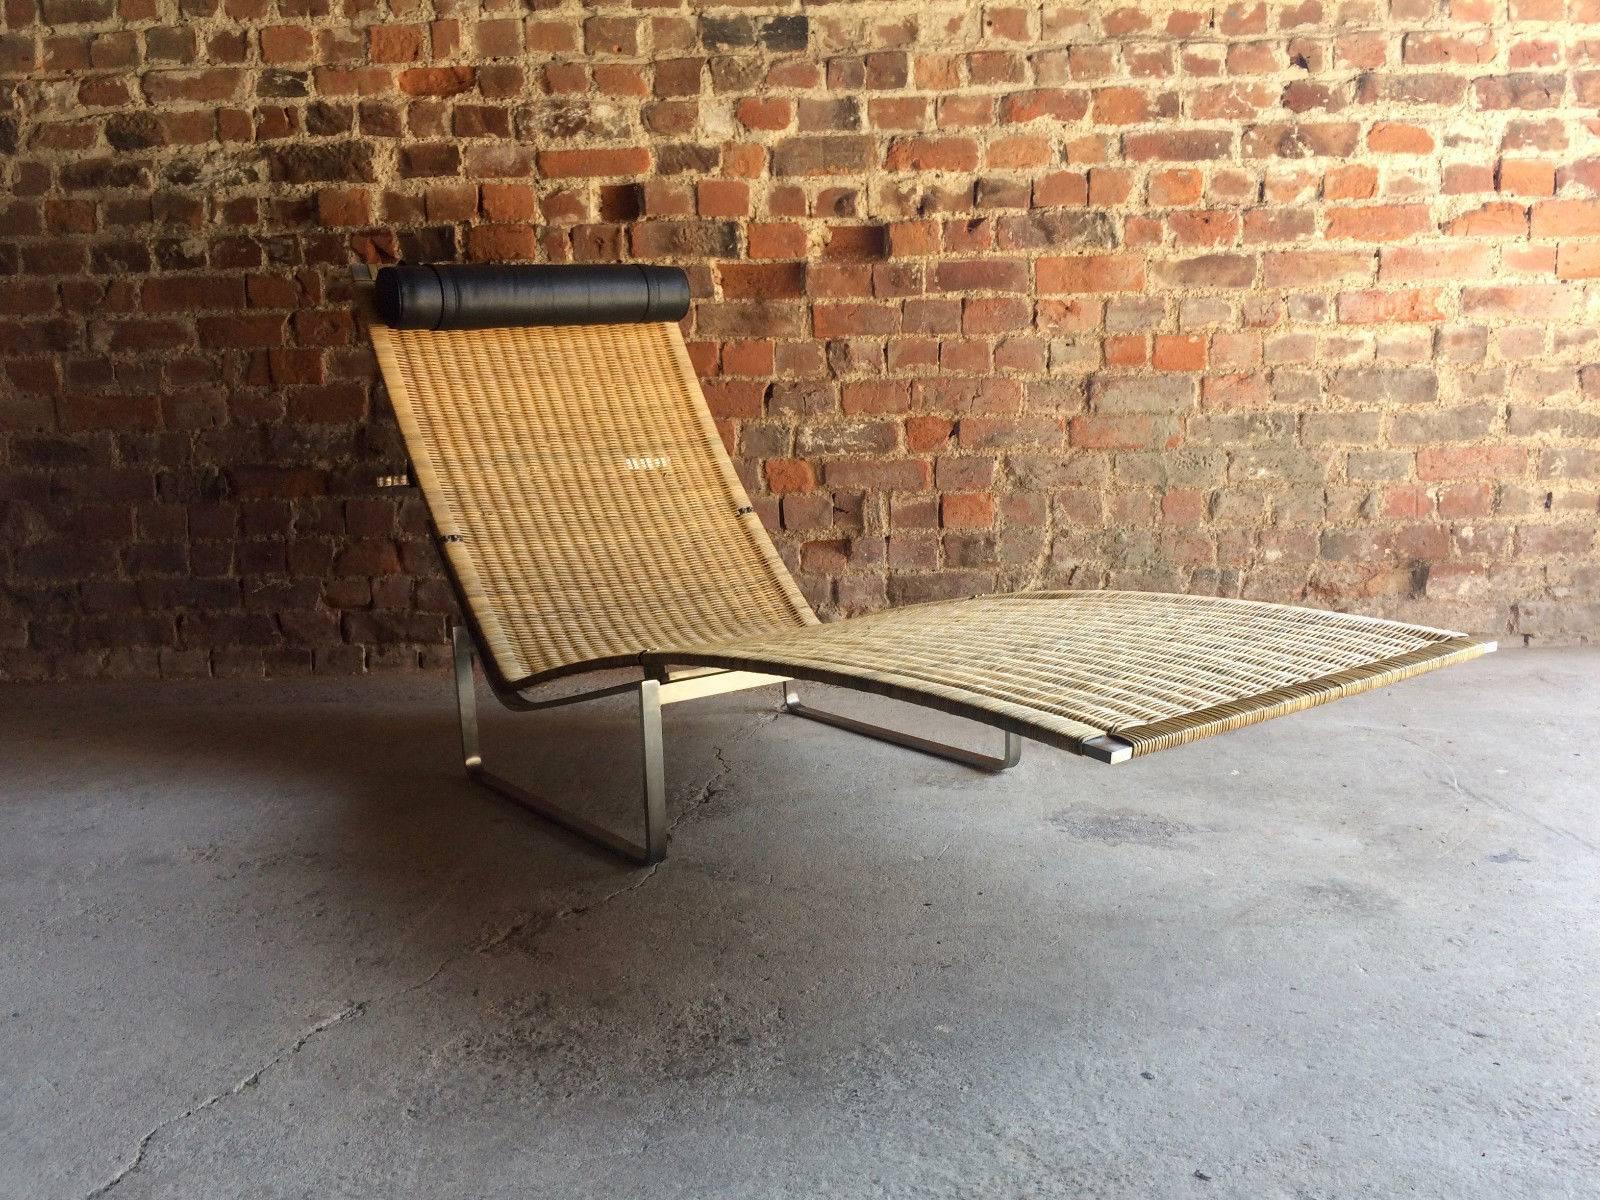 Stunning Poul Kjærholm Style Chaise Longue Lounger Model No. PK24 Bauhaus No.2 In Excellent Condition In Longdon, Tewkesbury